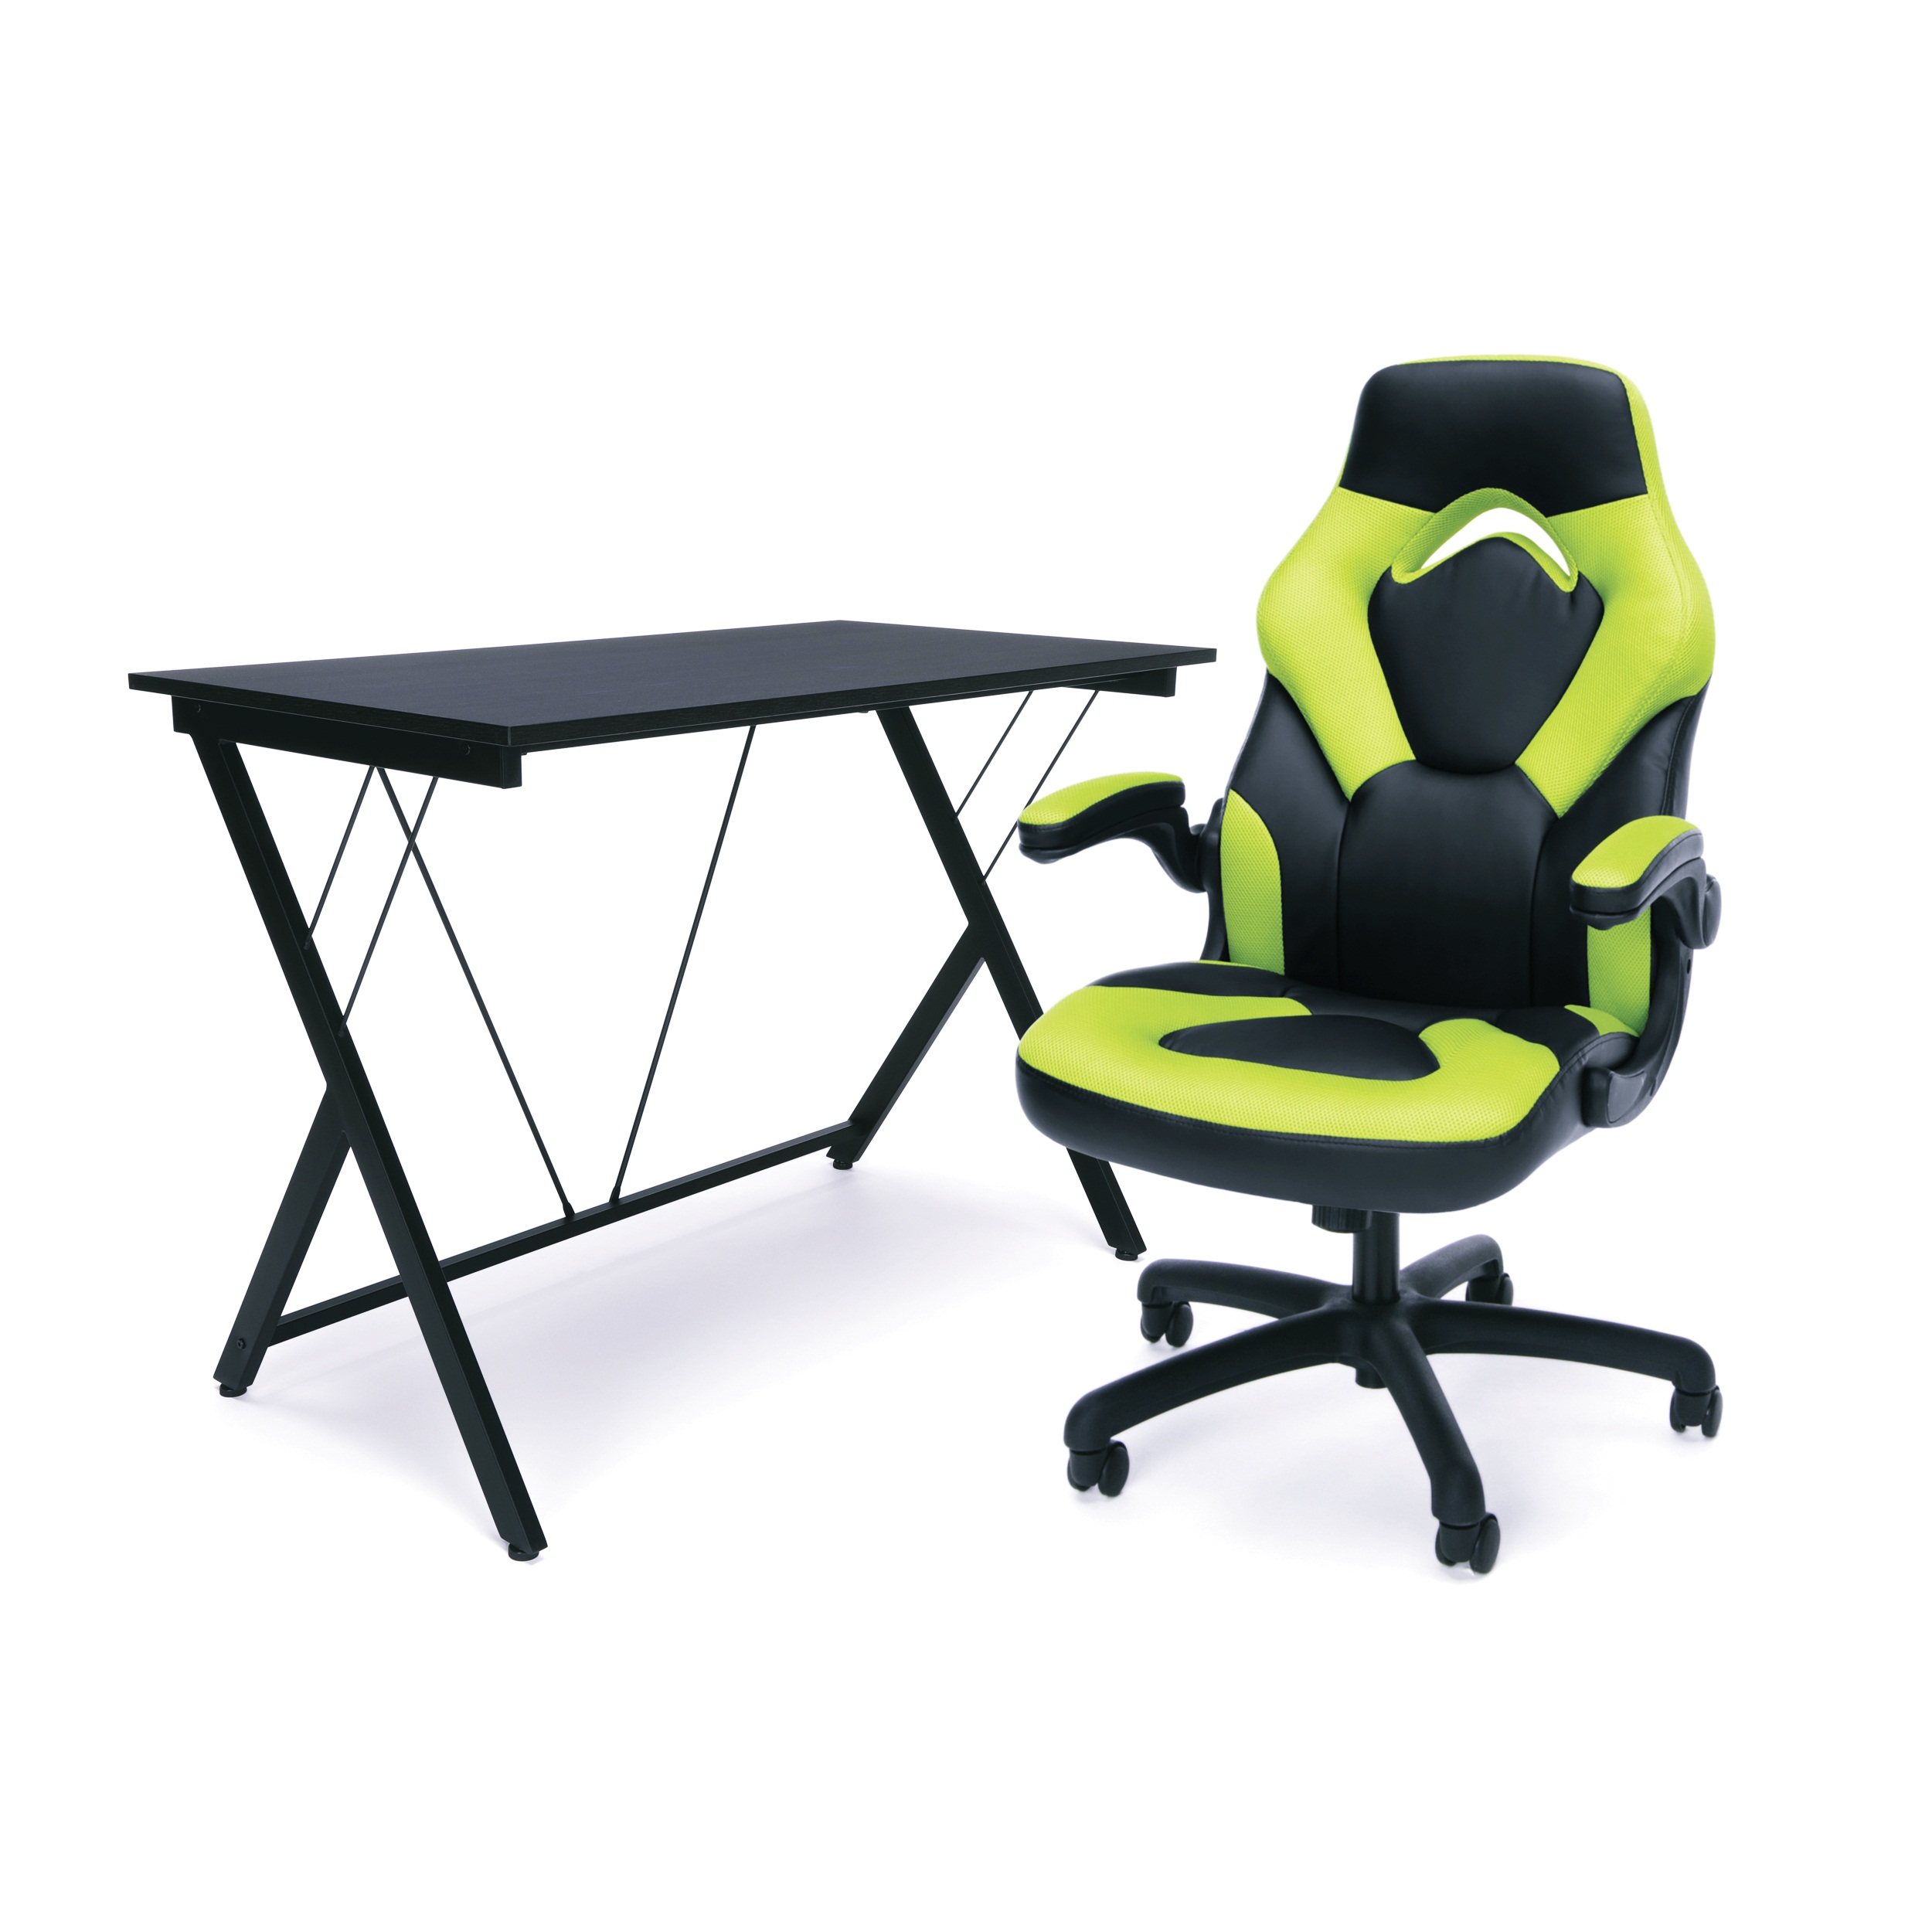 Today’s Best Gaming Chair & Desk Setup | HomeOfficeHQ - Home Office HQ